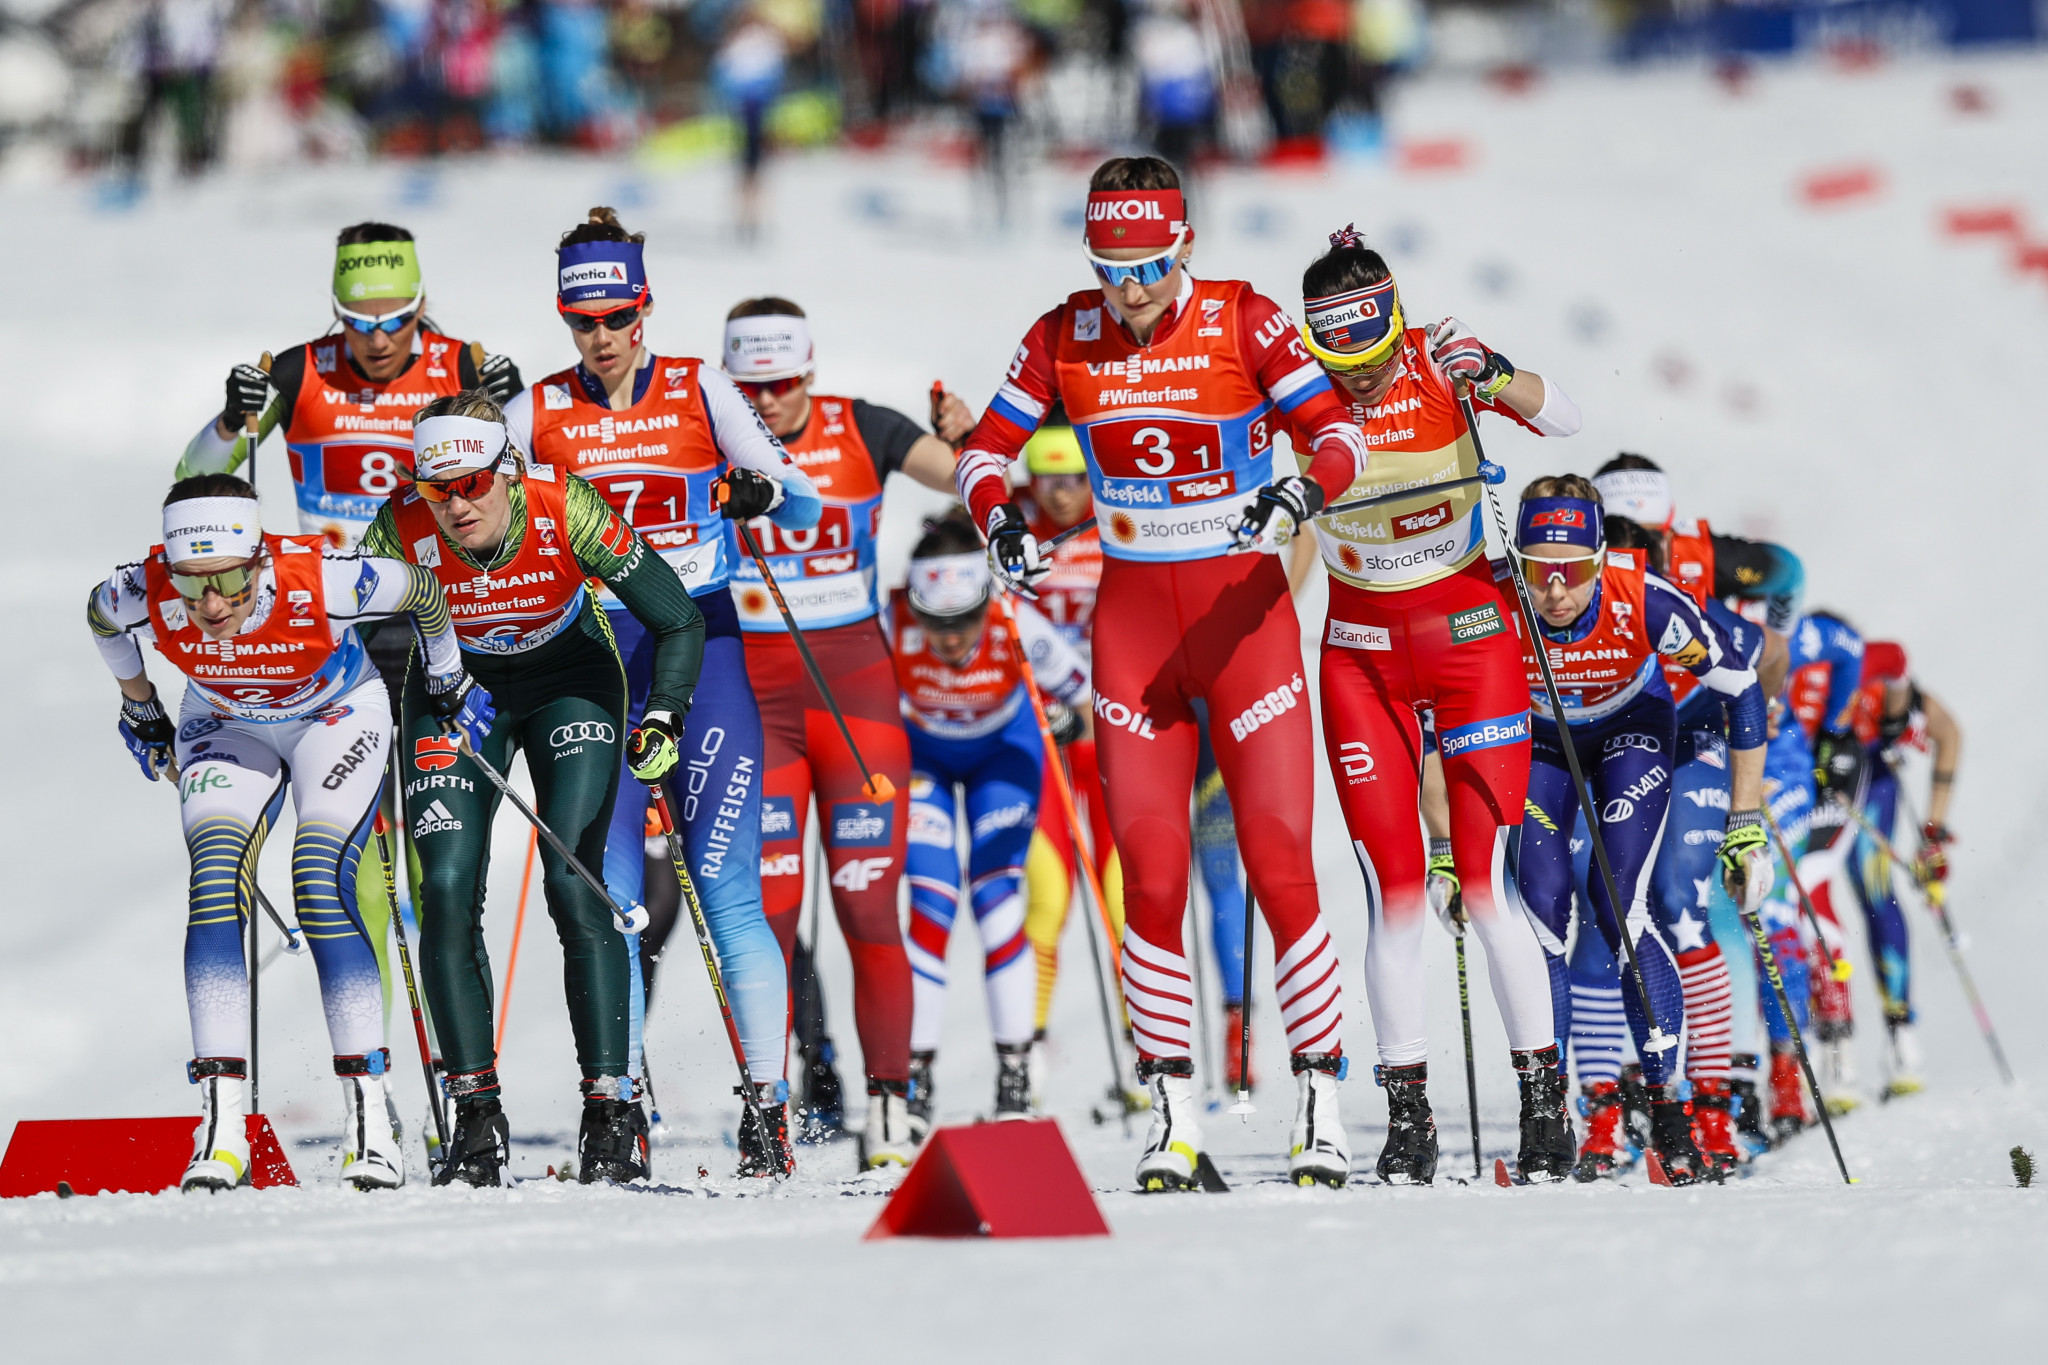 The race proved to be a thrilling event in the Austrian resort ©Getty Images